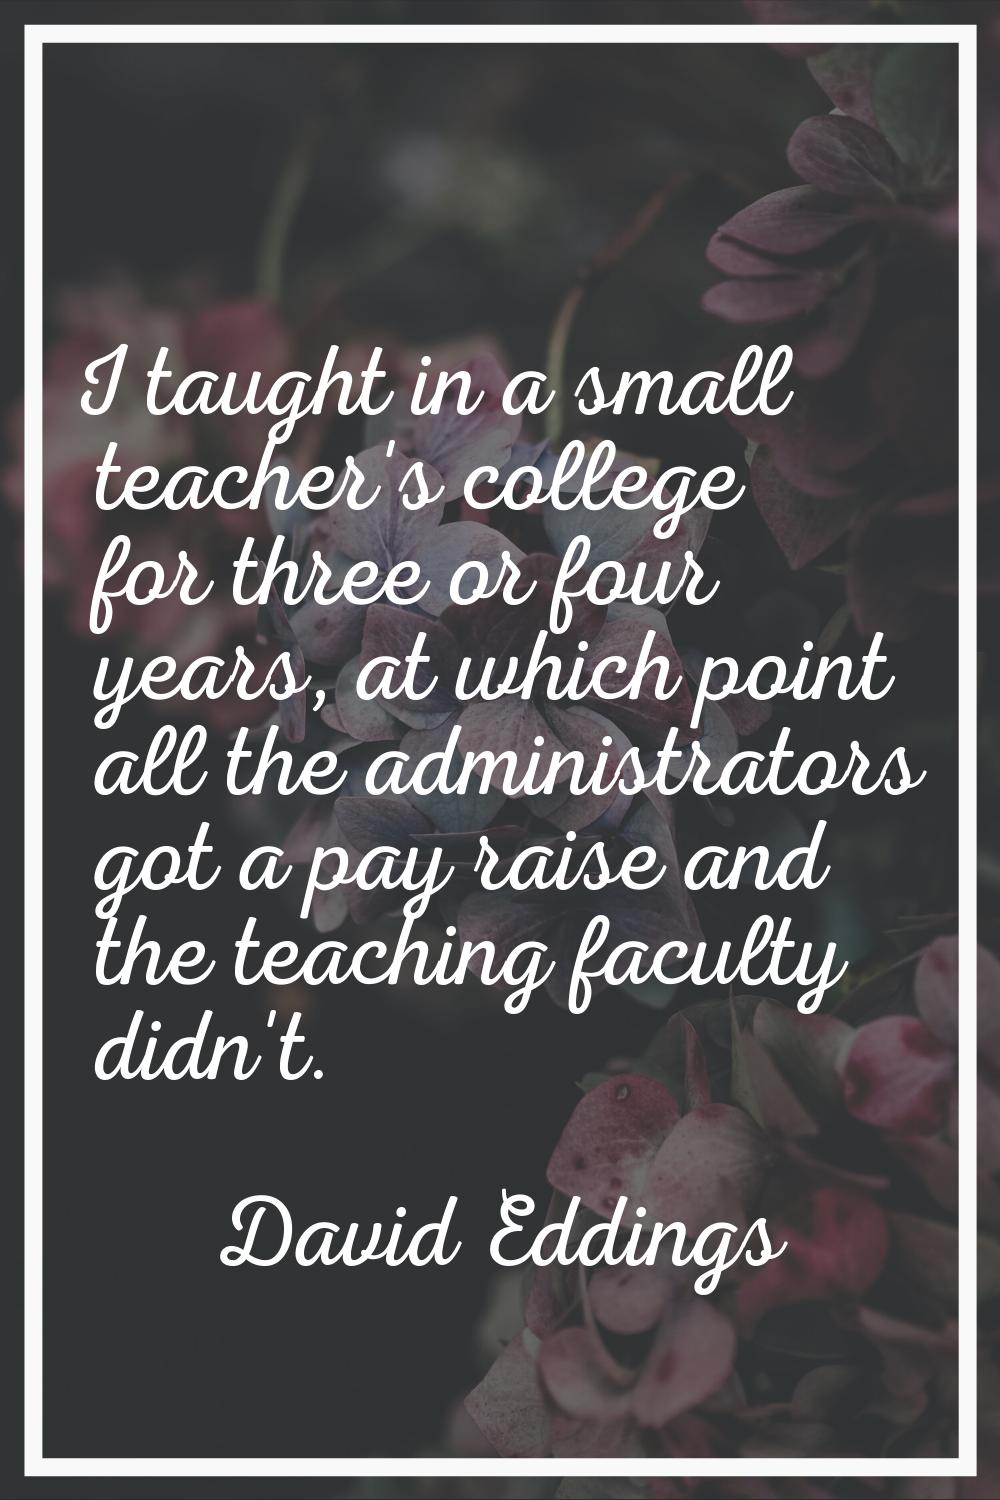 I taught in a small teacher's college for three or four years, at which point all the administrator